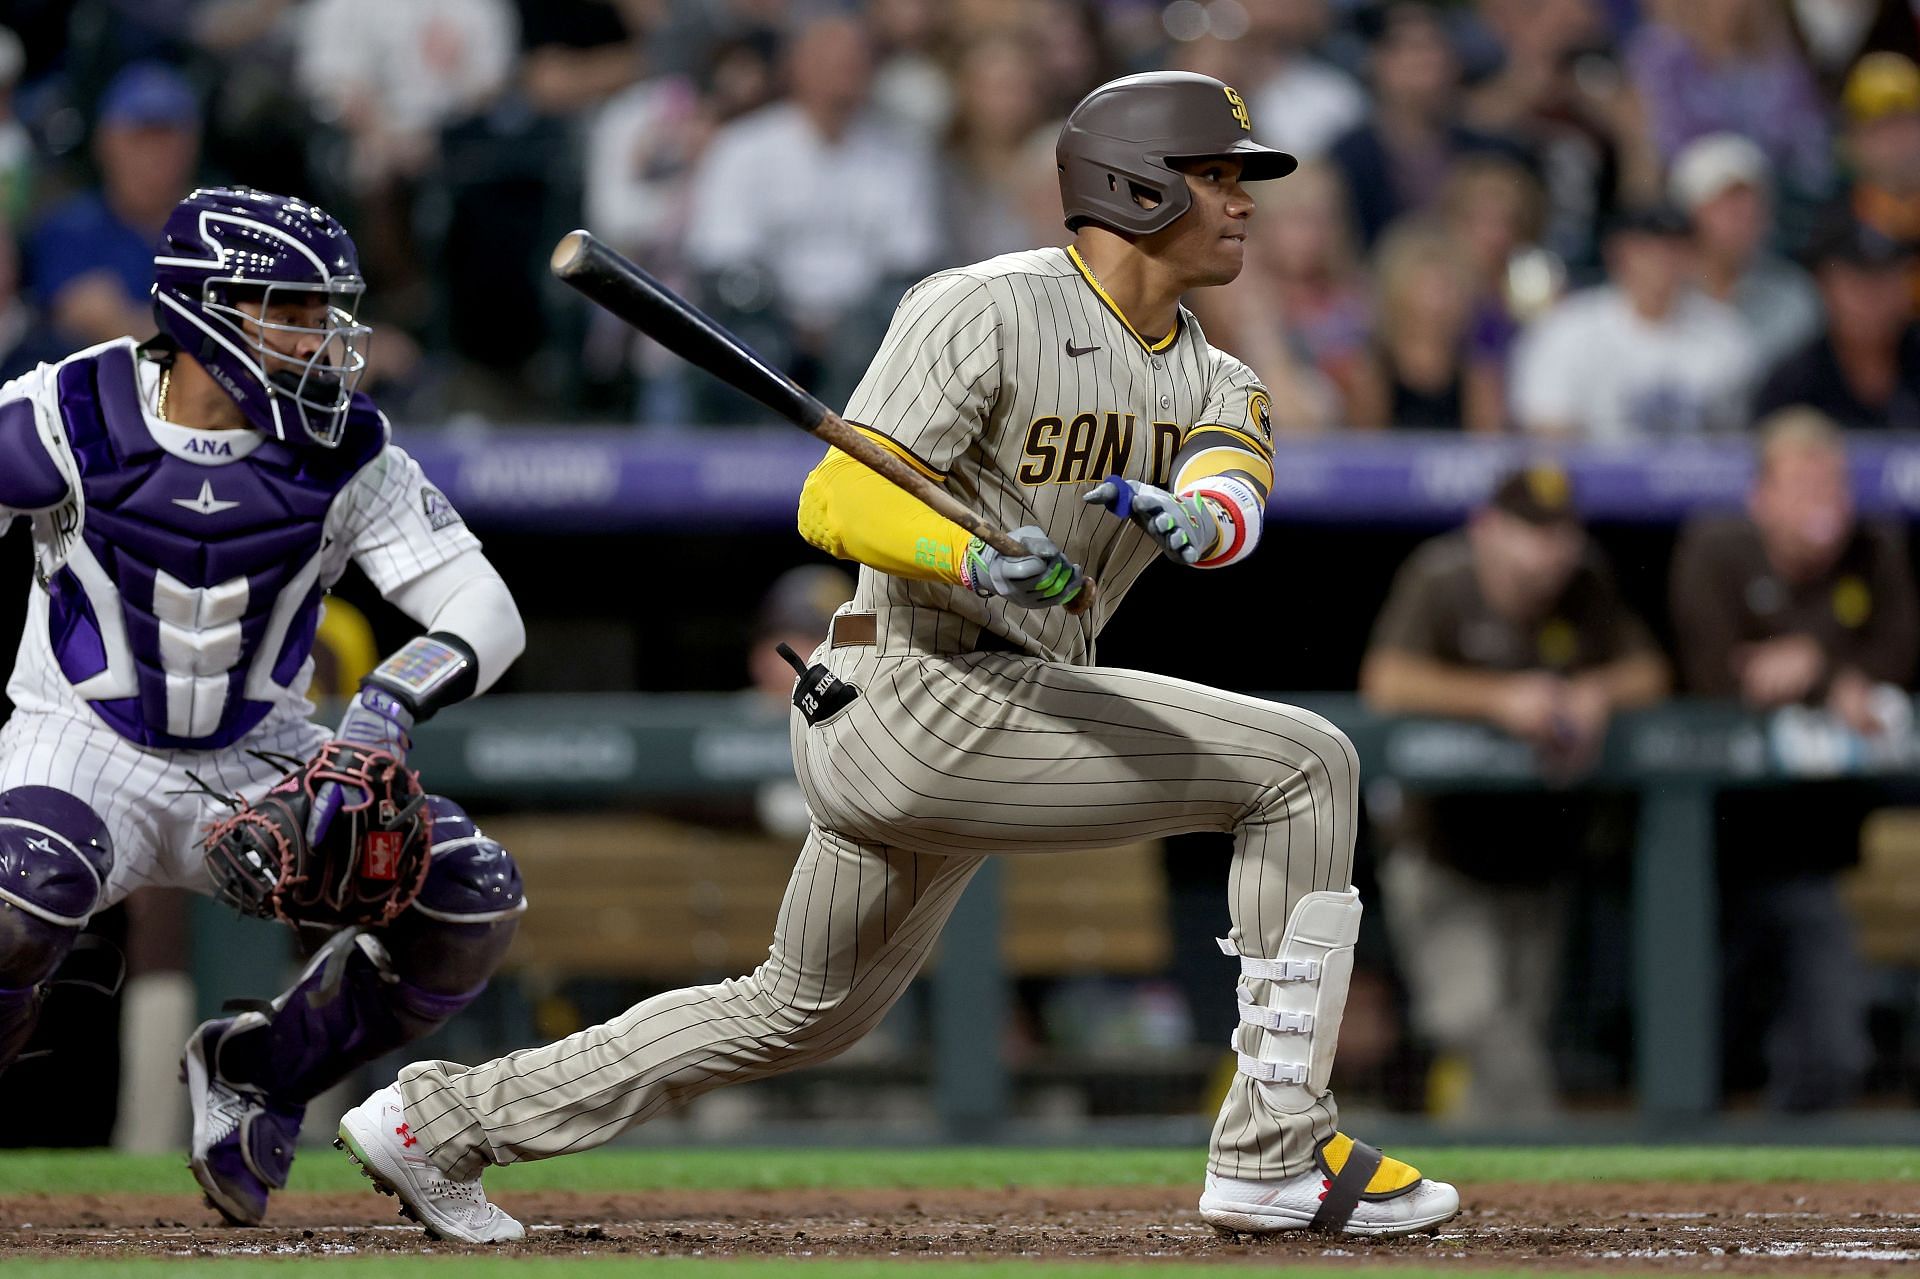 Juan Soto of the San Diego Padres hits a ground out RBI against the Colorado Rockies in the third inning at Coors Field